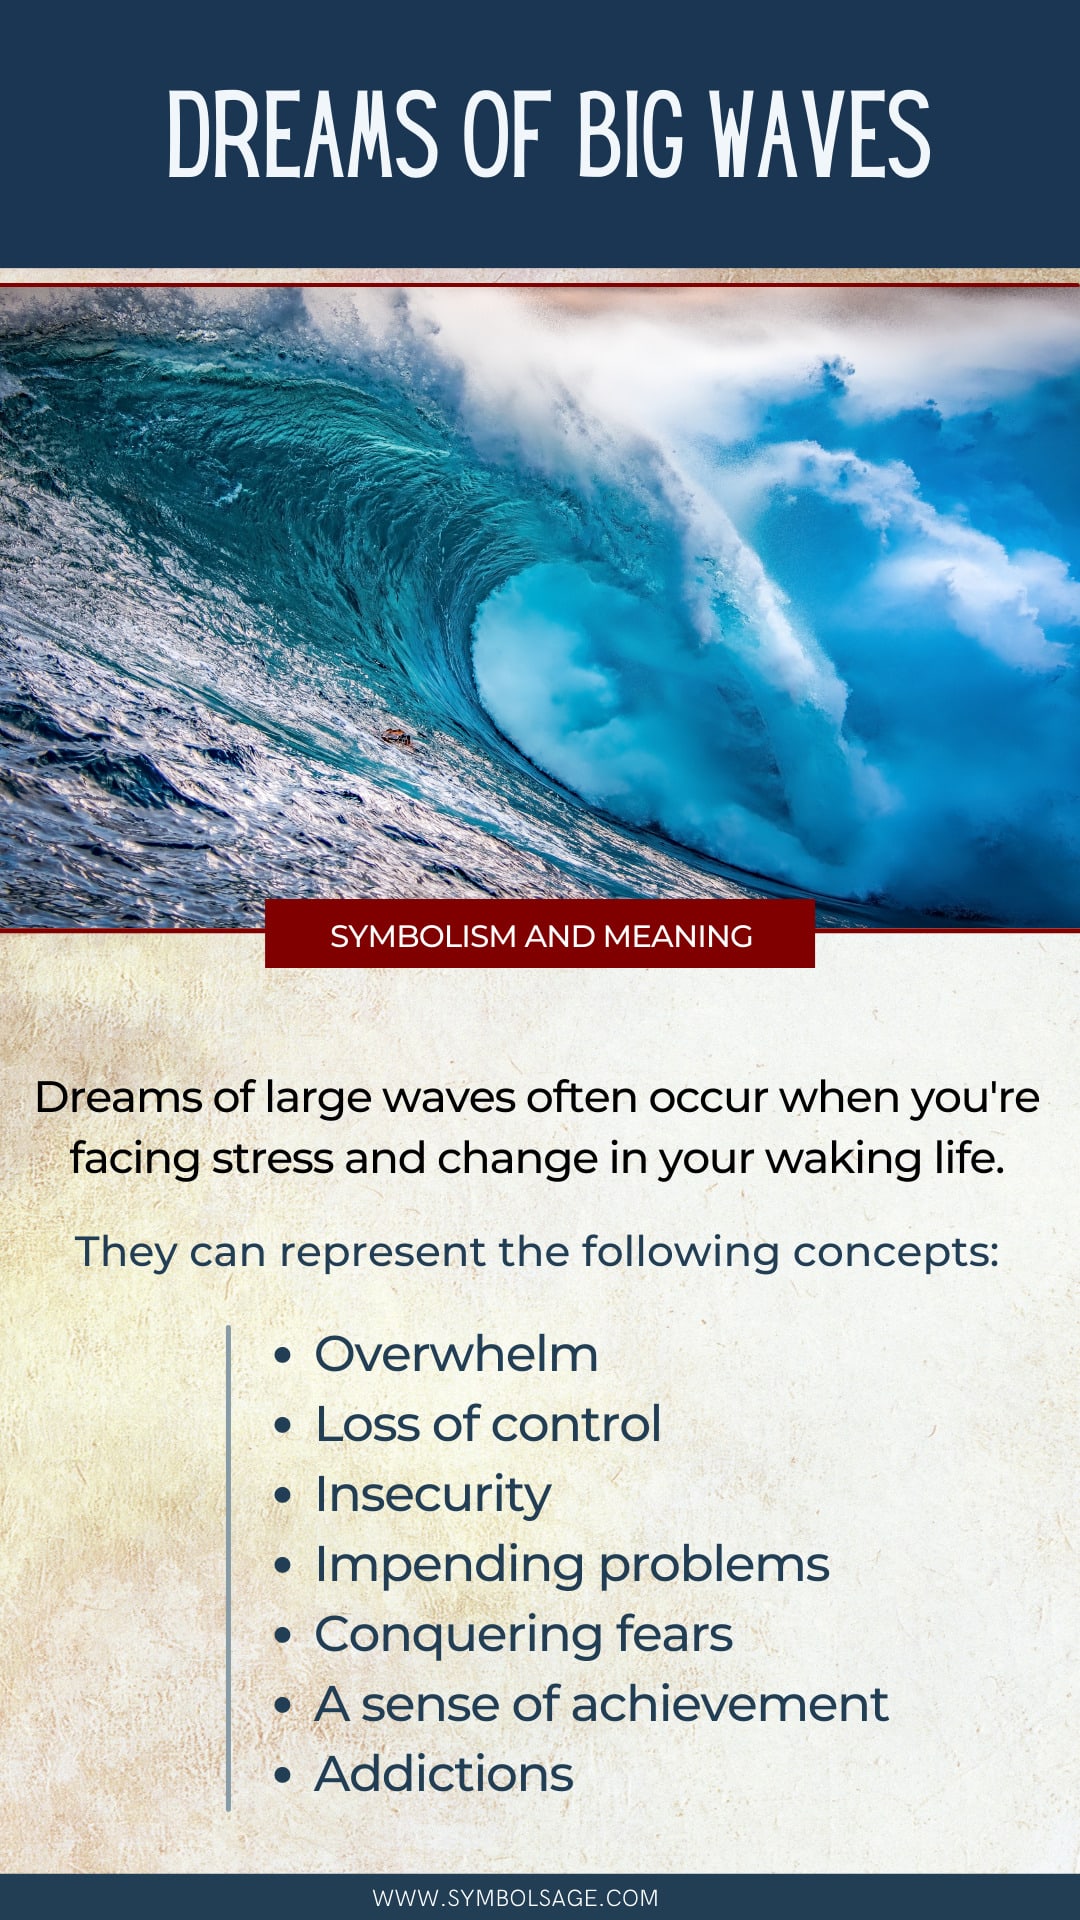 What Are Waves Dreams?